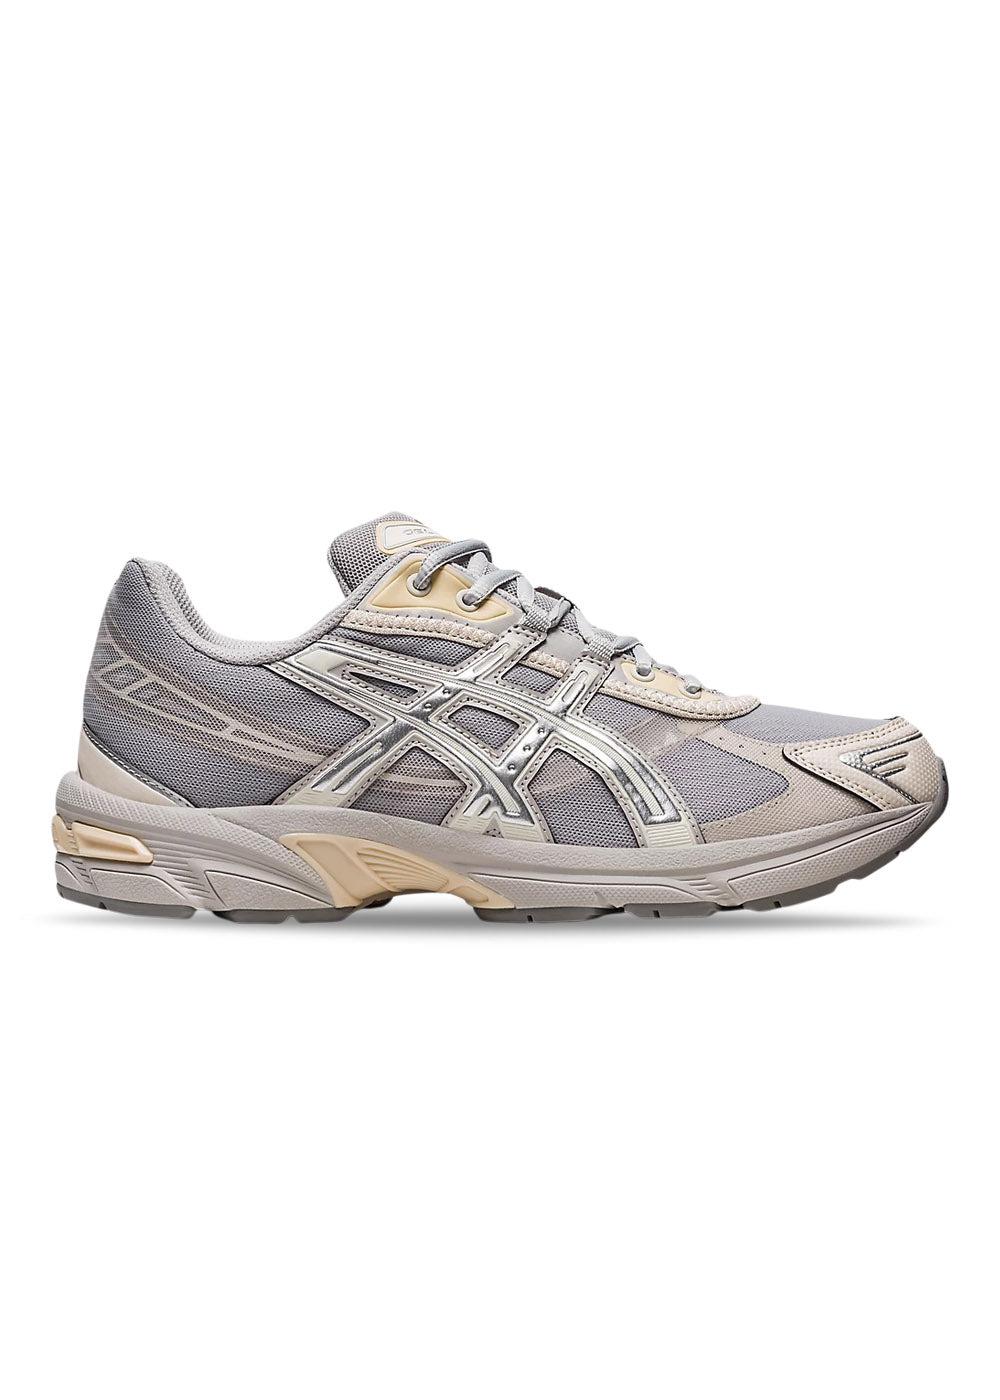 Asics' GEL-1130 RE - Oyster Grey/Pure Silver. Køb sneakers her.